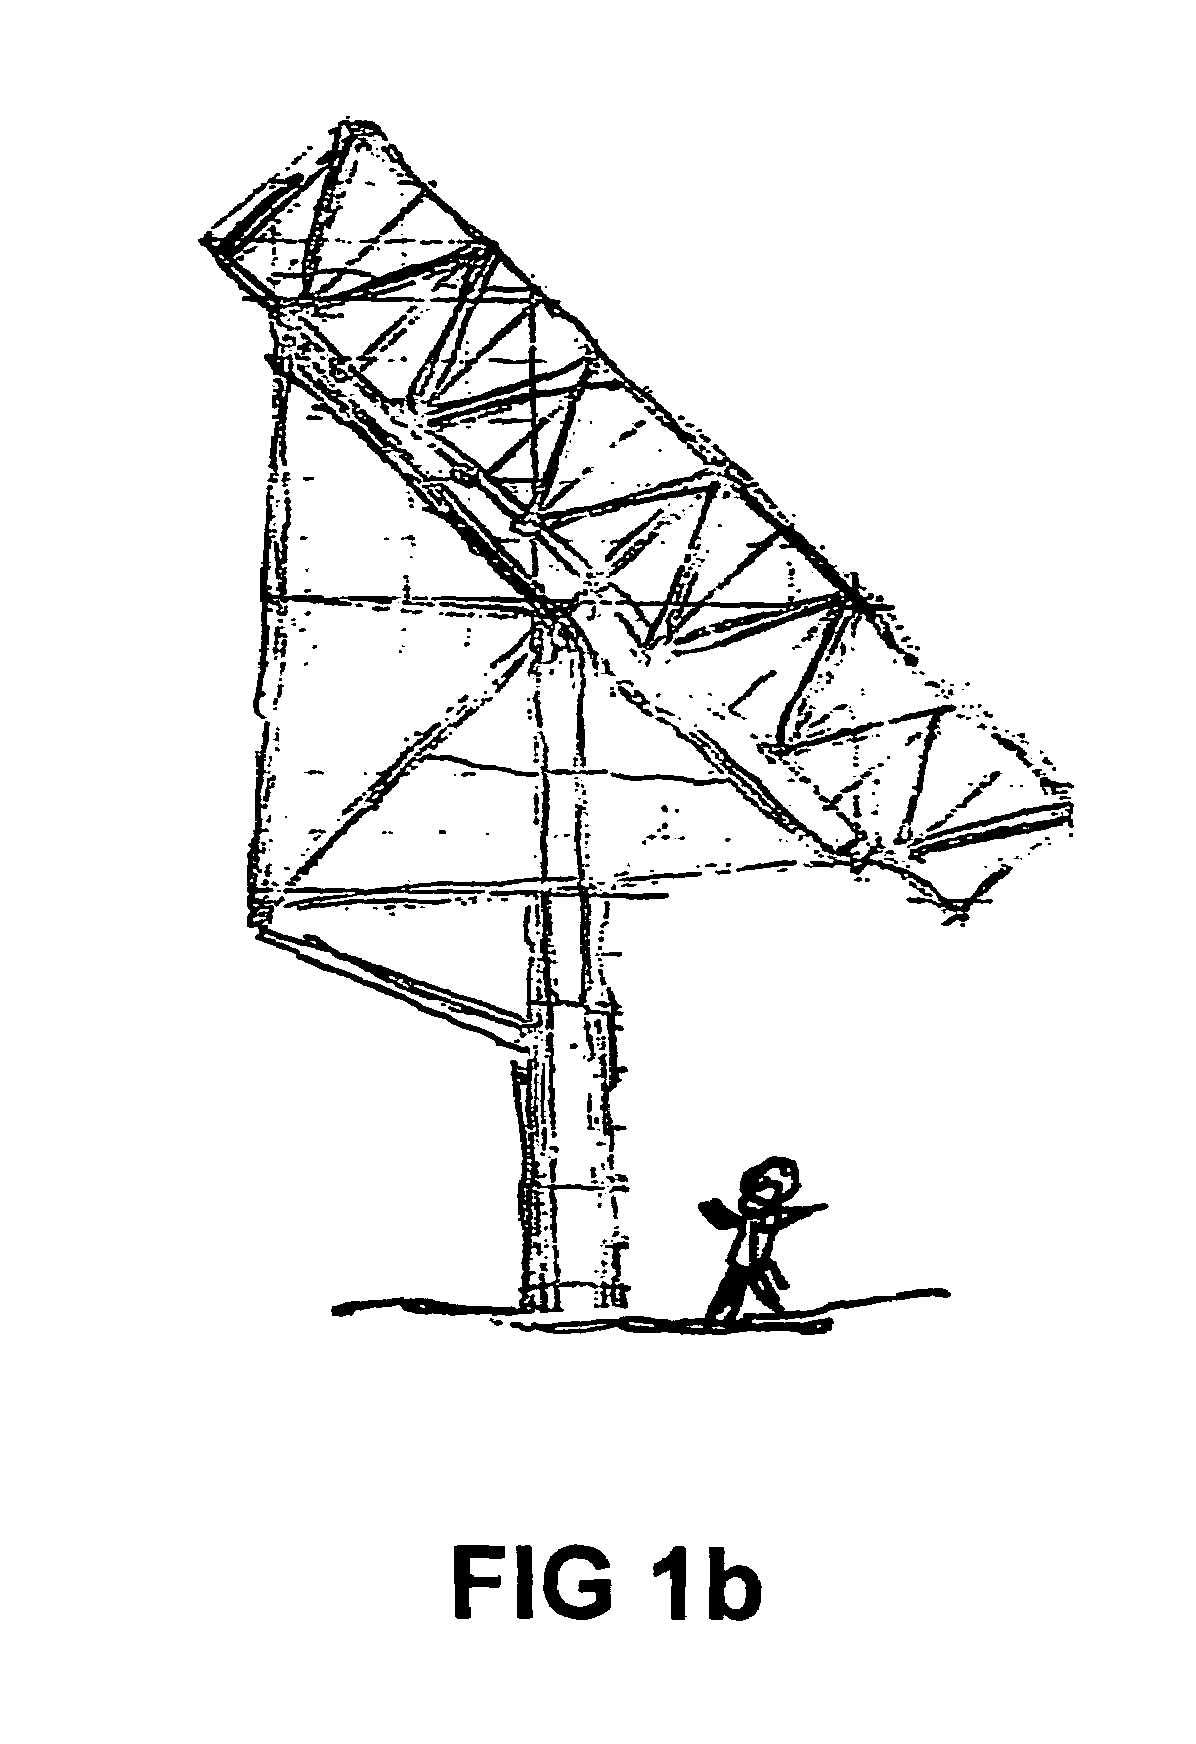 Solfire solar concentrator and pointer structure